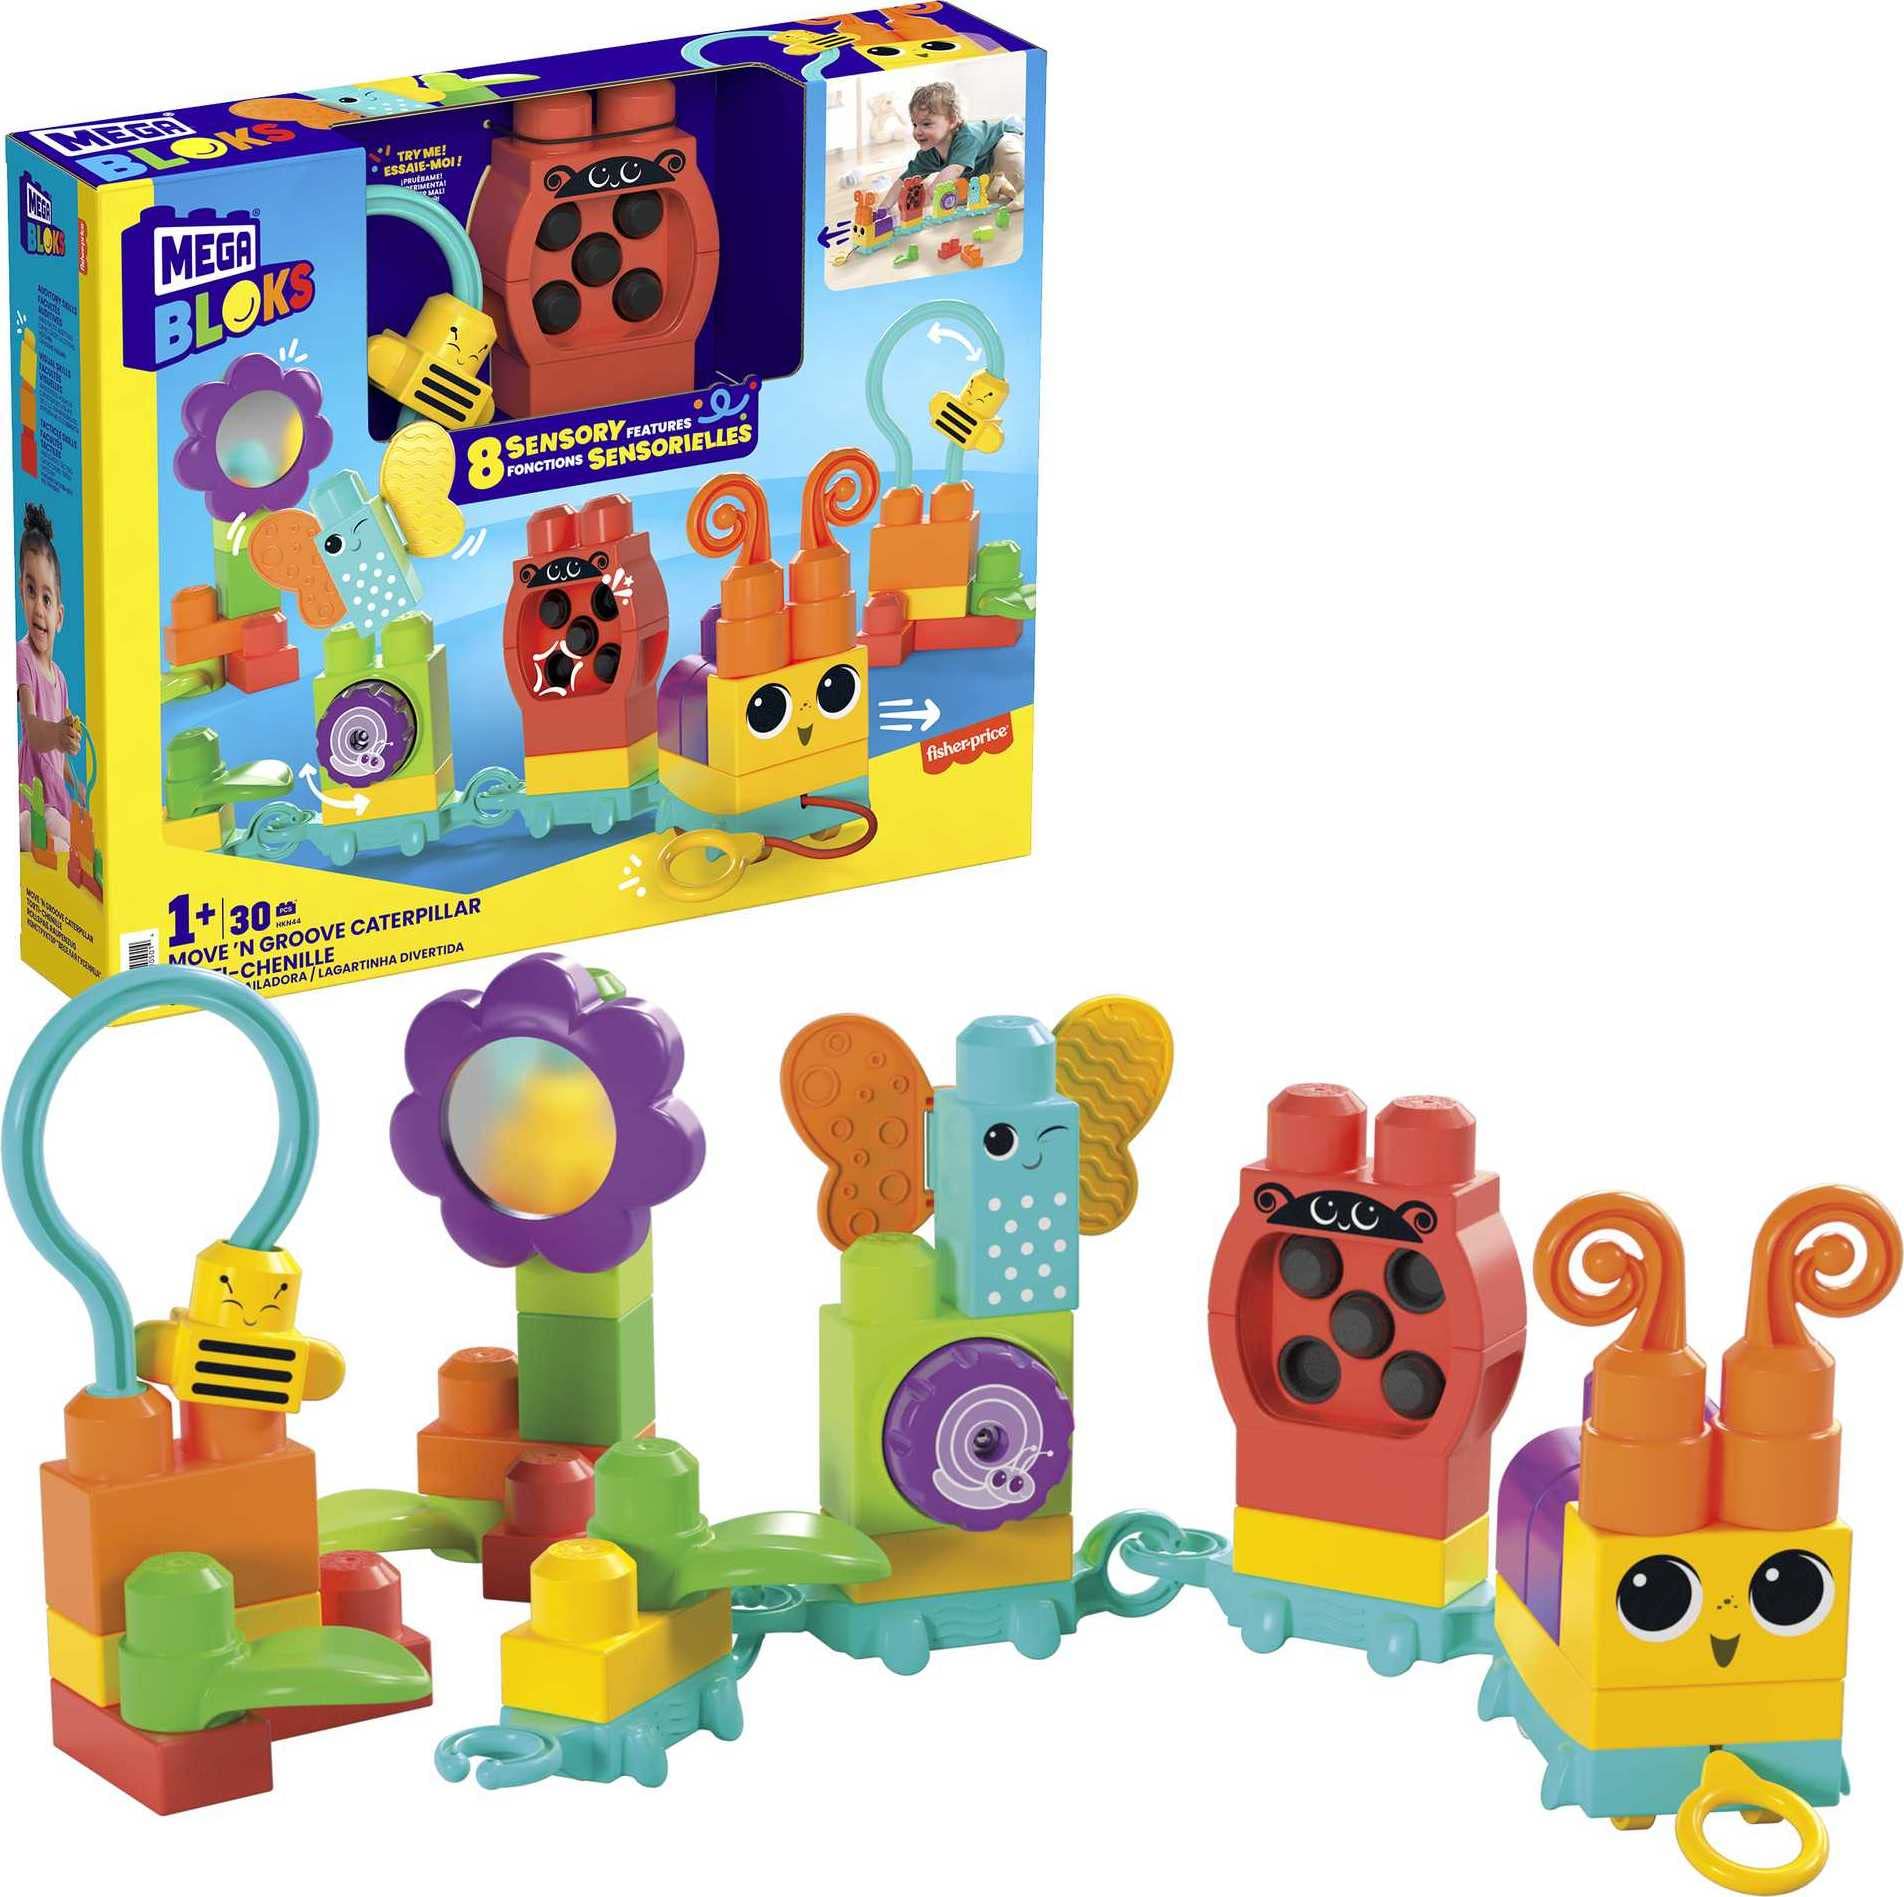 24-Piece Mega Bloks Fisher Price Sensory Building Blocks Move N Groove Caterpillar Train w/ Pull String $10.49 + Free Shipping w/ Prime or on $35+